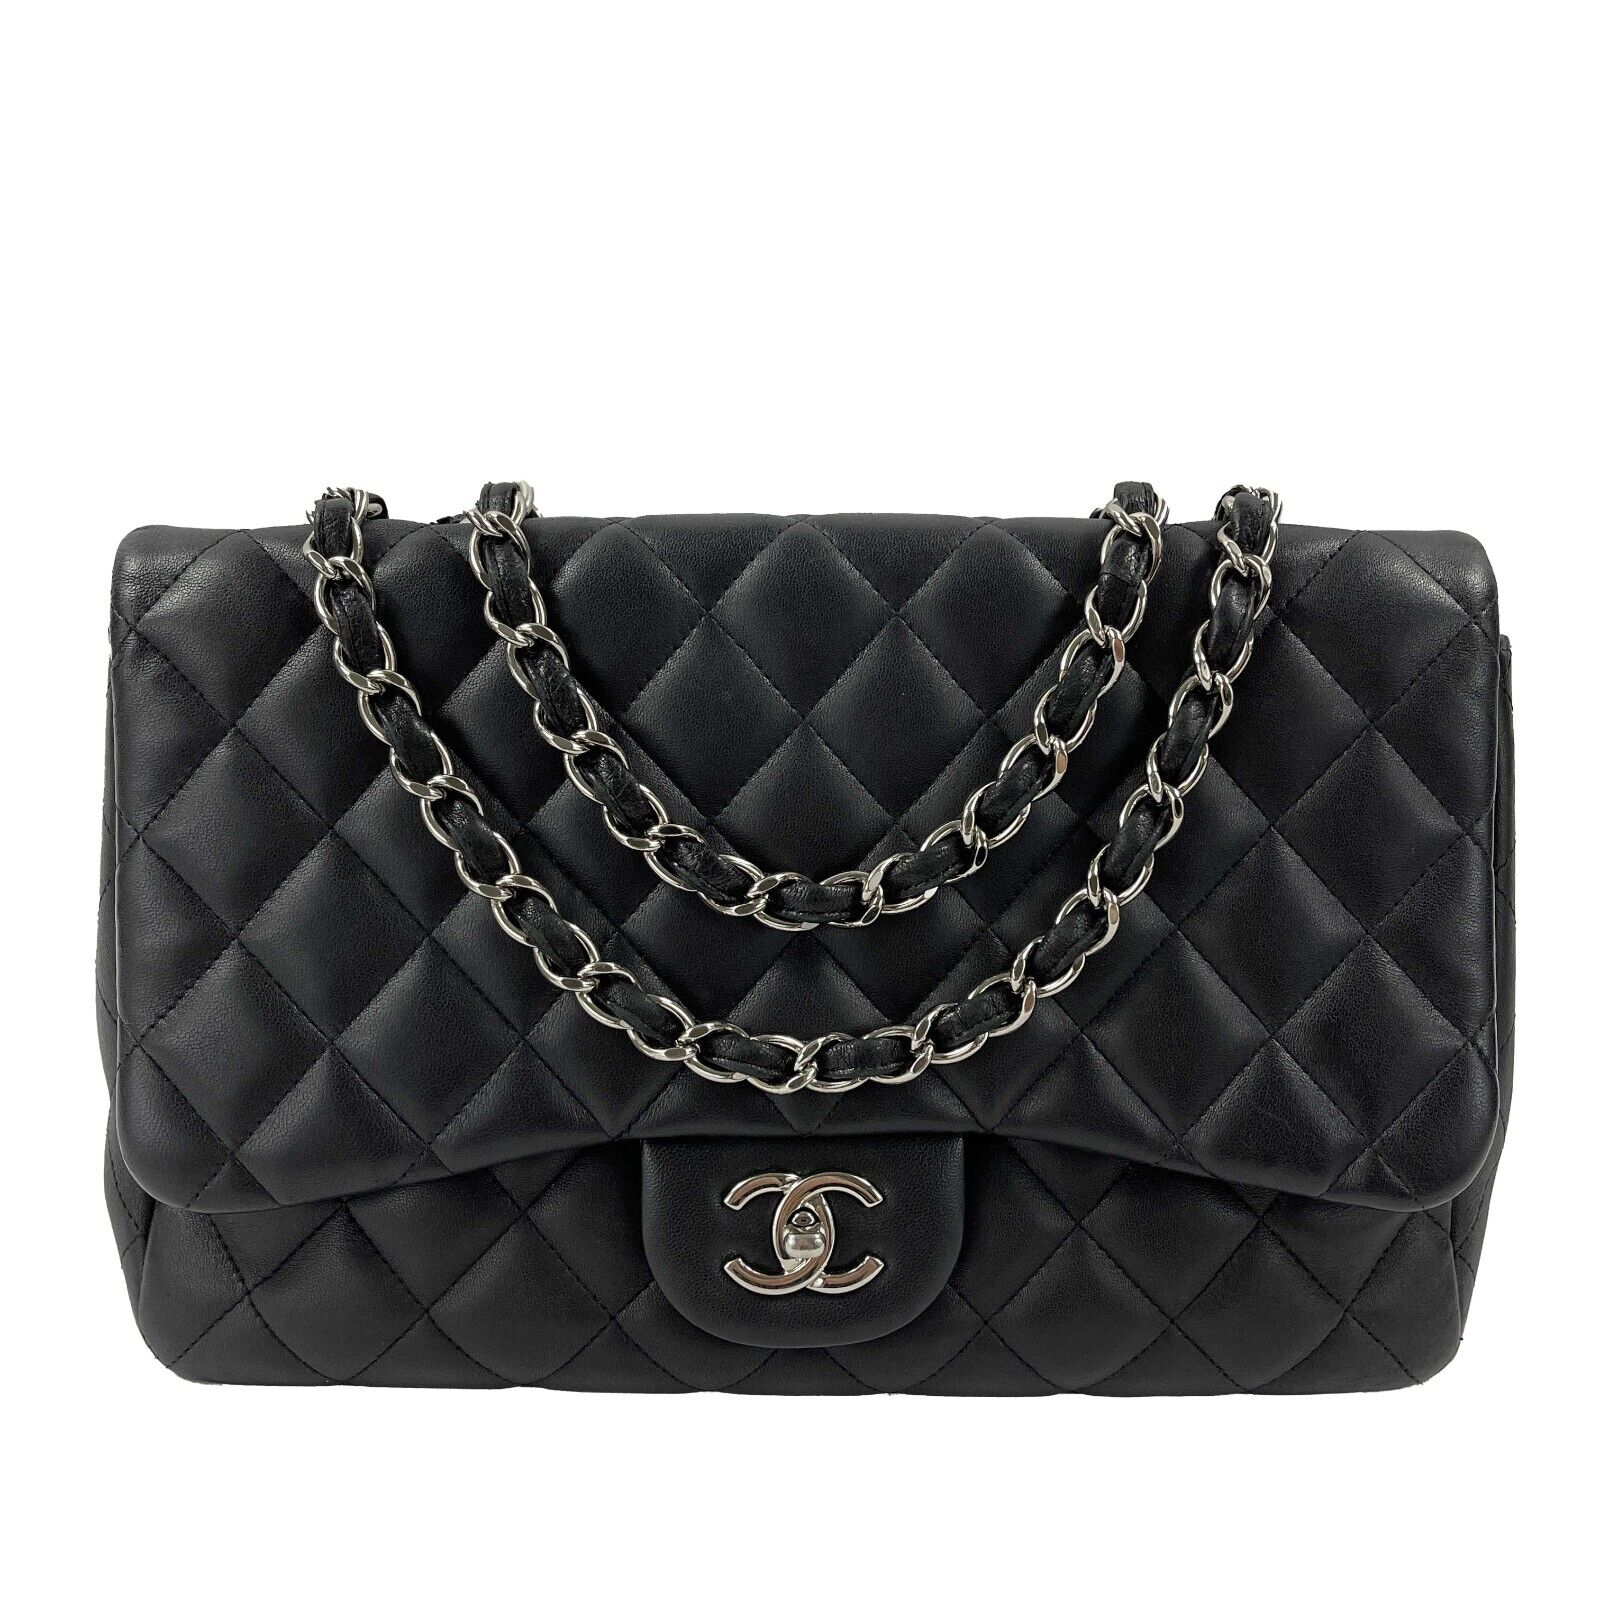 Chanel Jumbo Classic Flap CC Quilted Lambskin Shoulder Bag